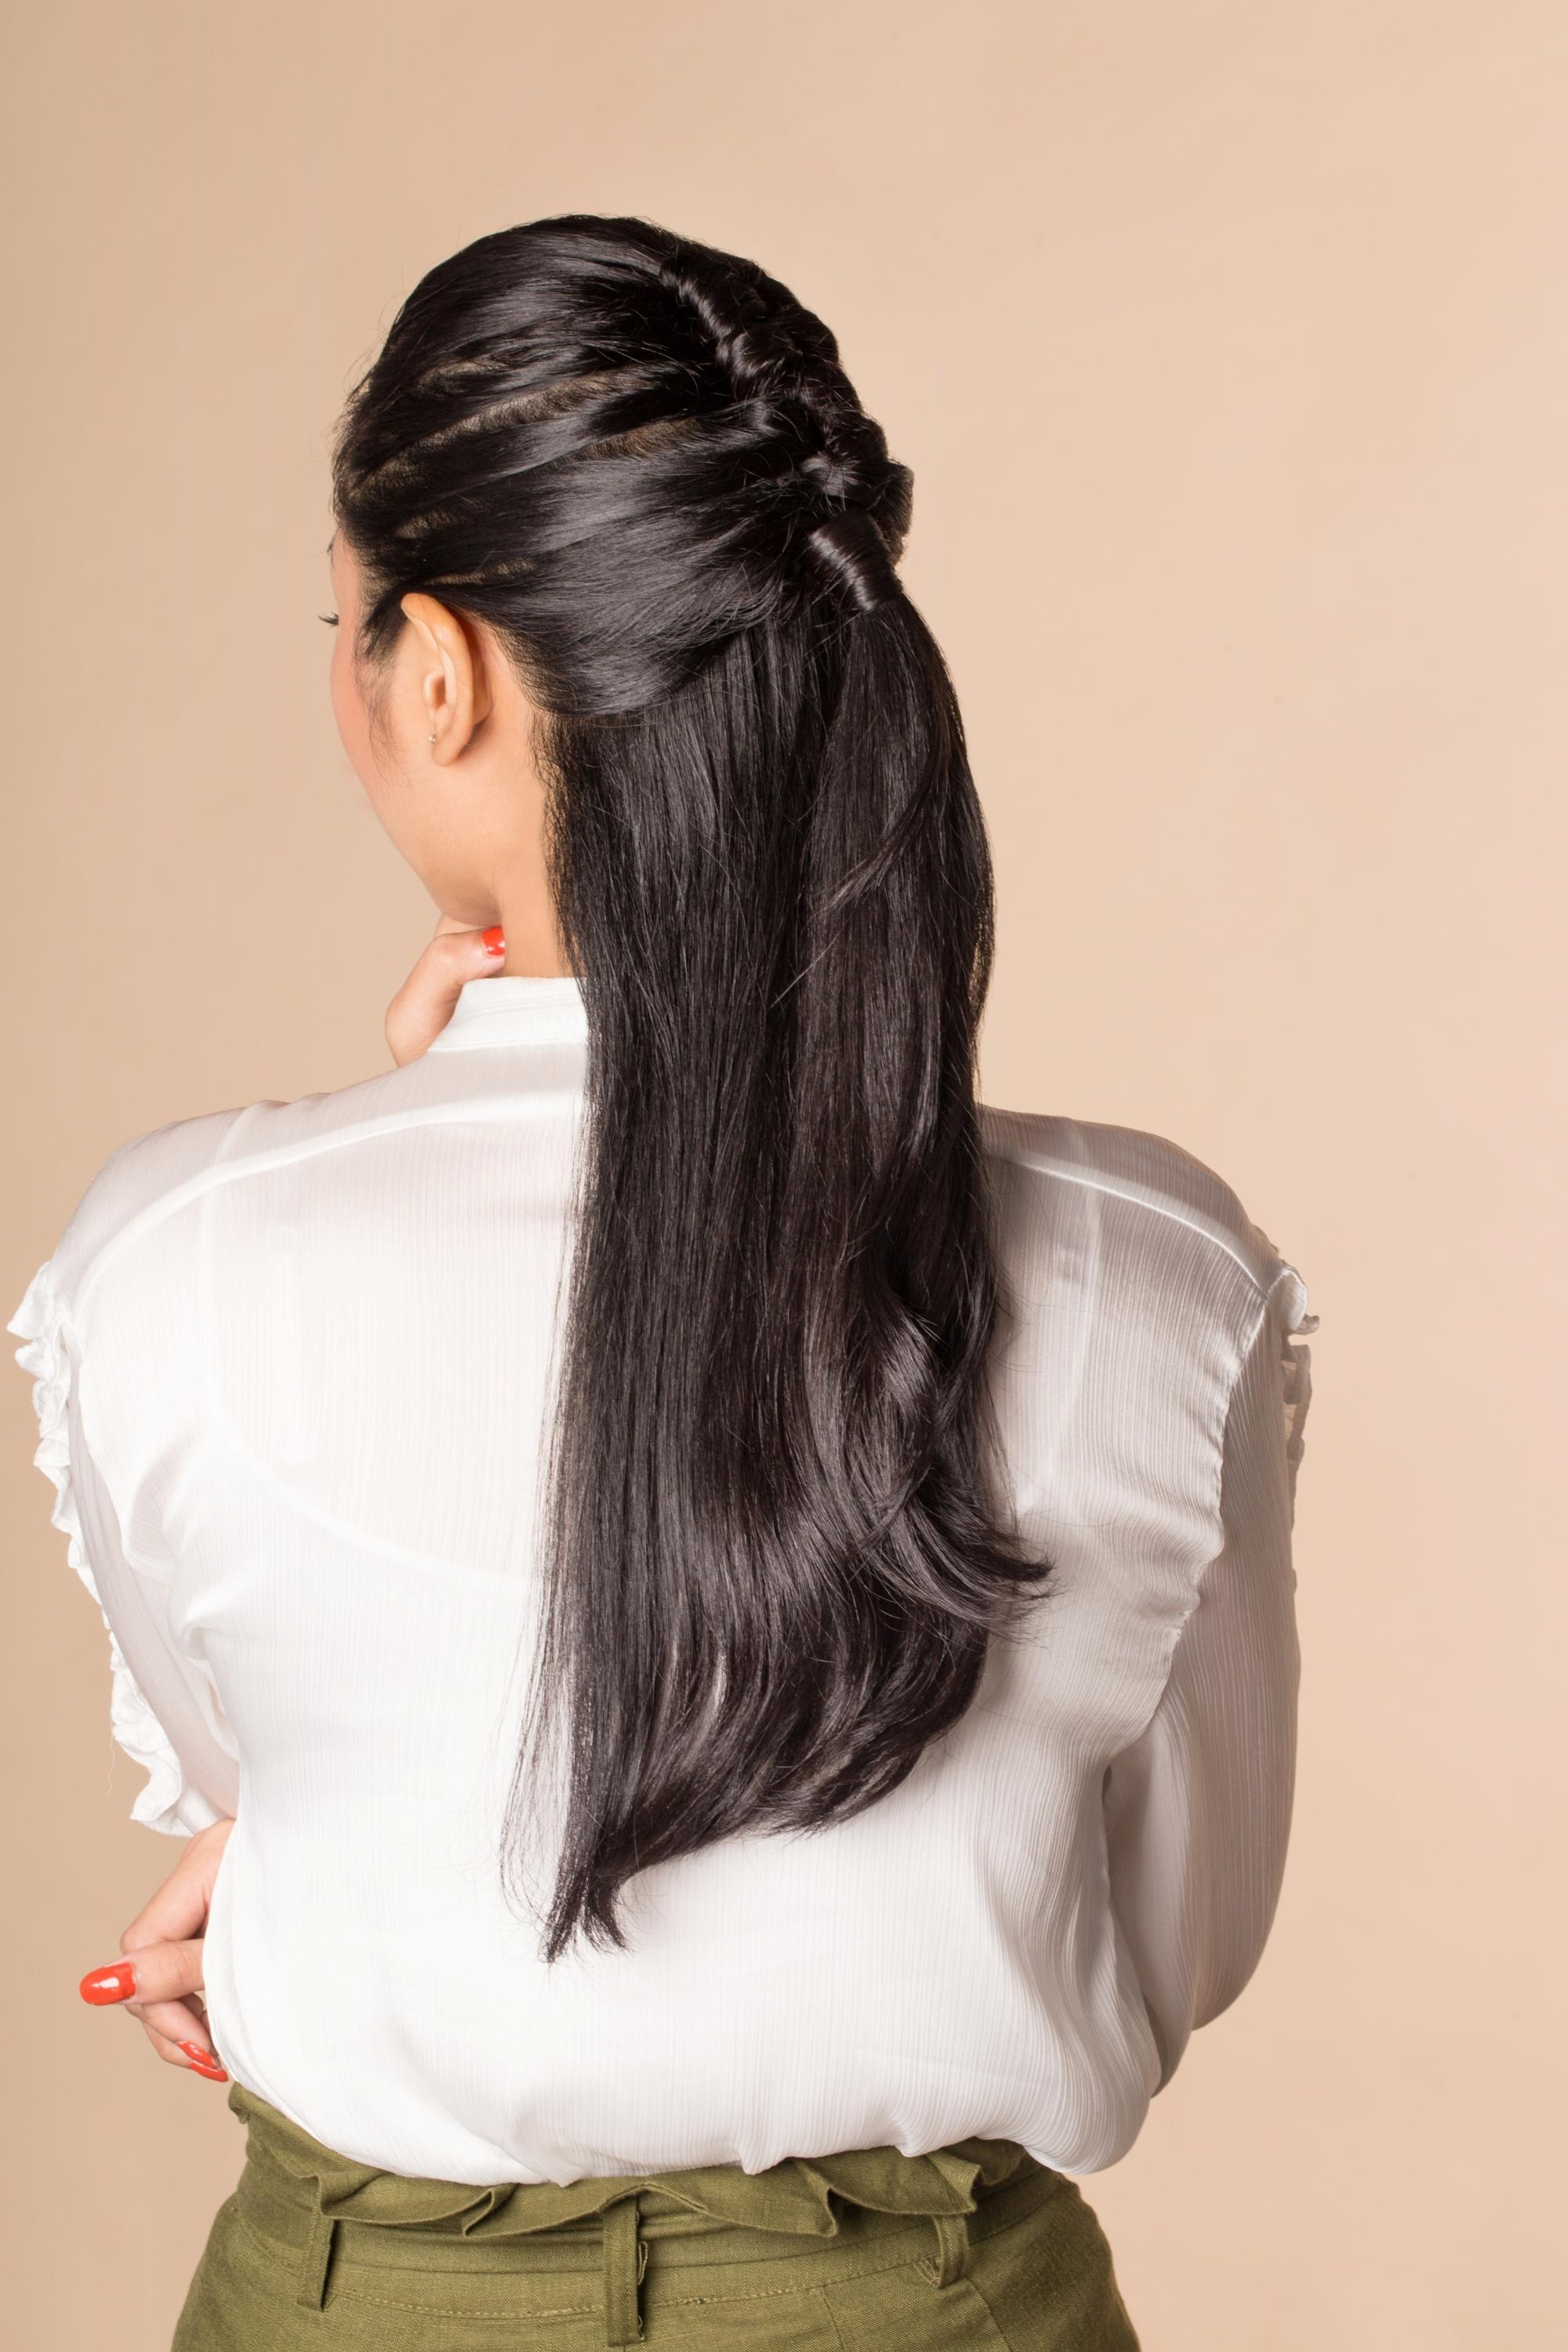 Back shot of an Asian woman with long hair in a half updo